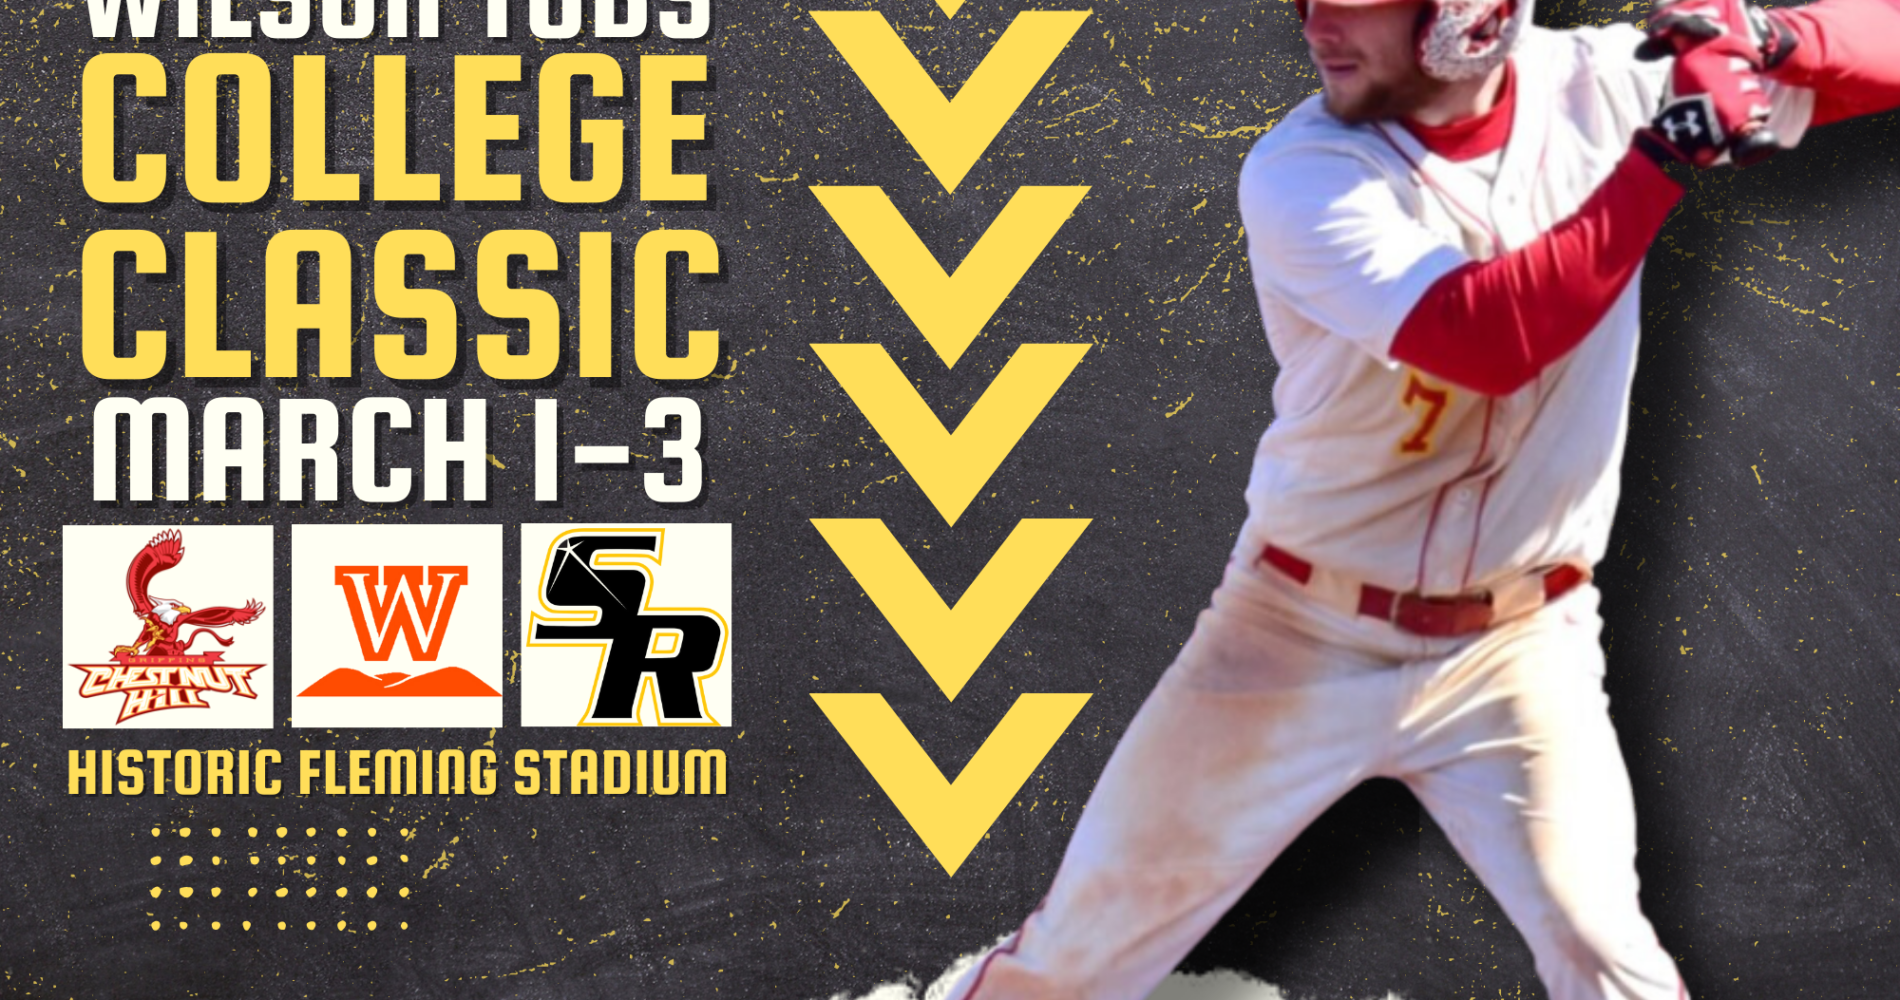 Tobs 2nd College Baseball Classic This Weekend!